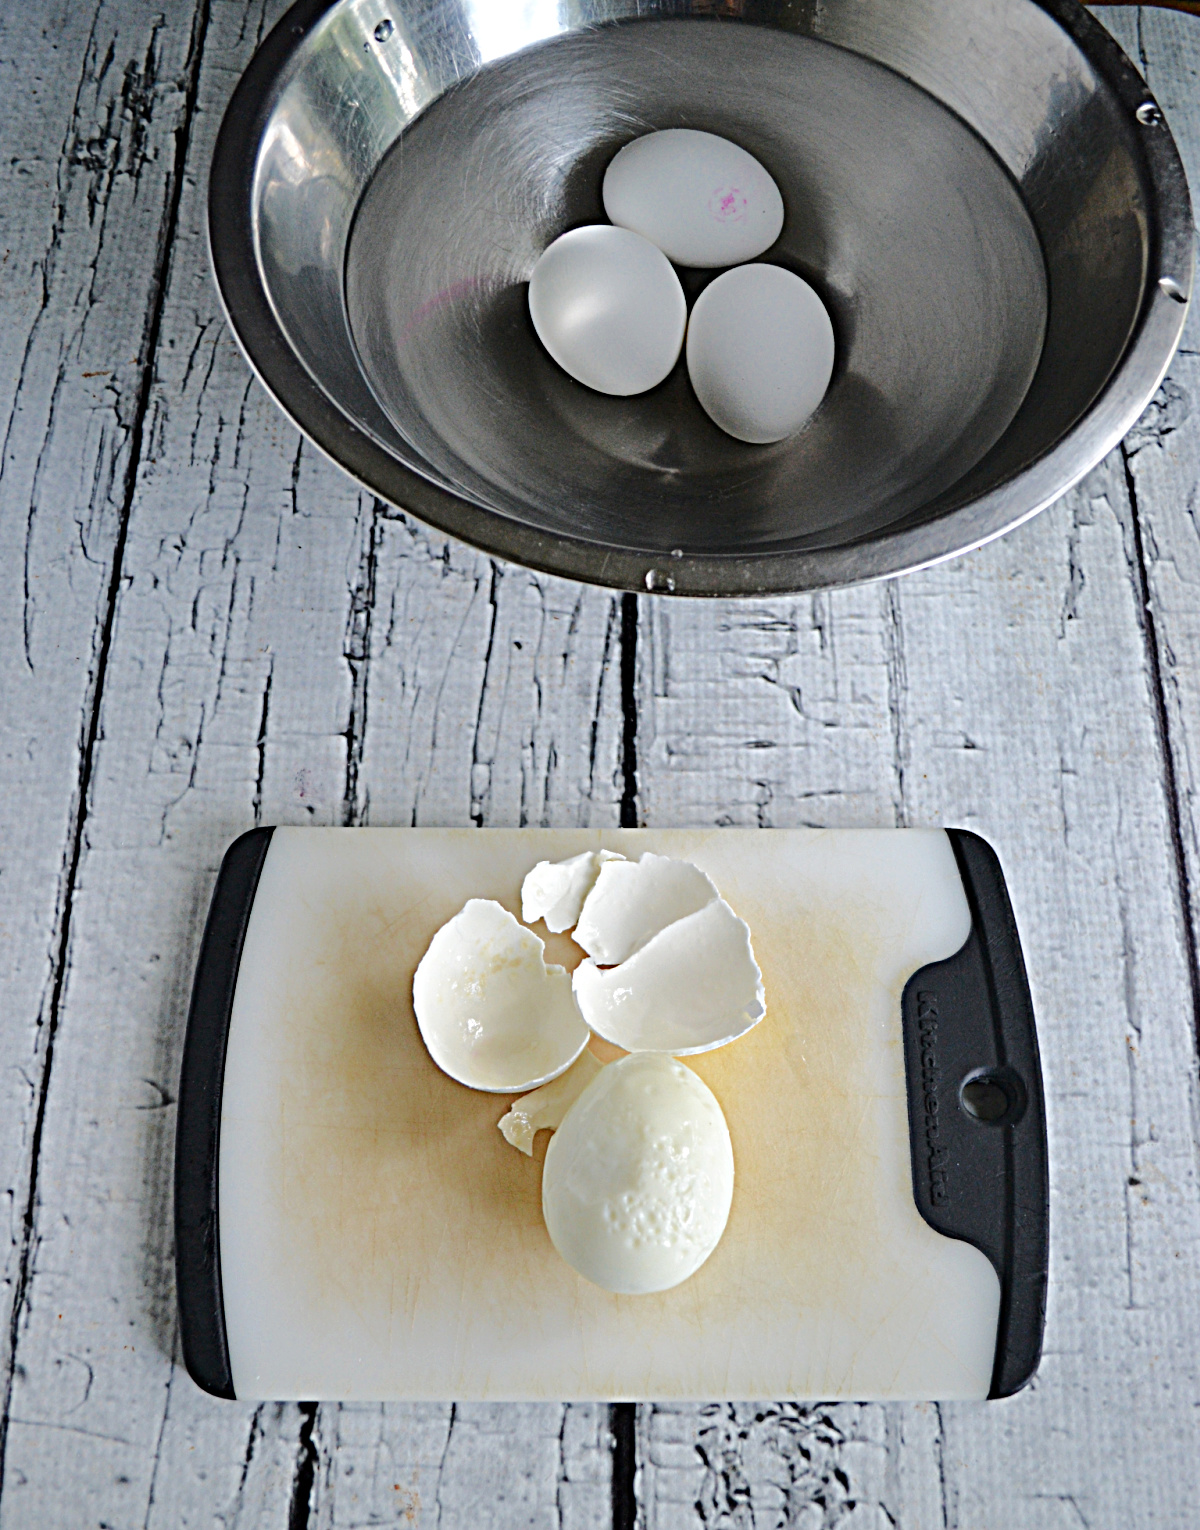 A bowl of hard boiled eggs and one egg with the shell taken off. 